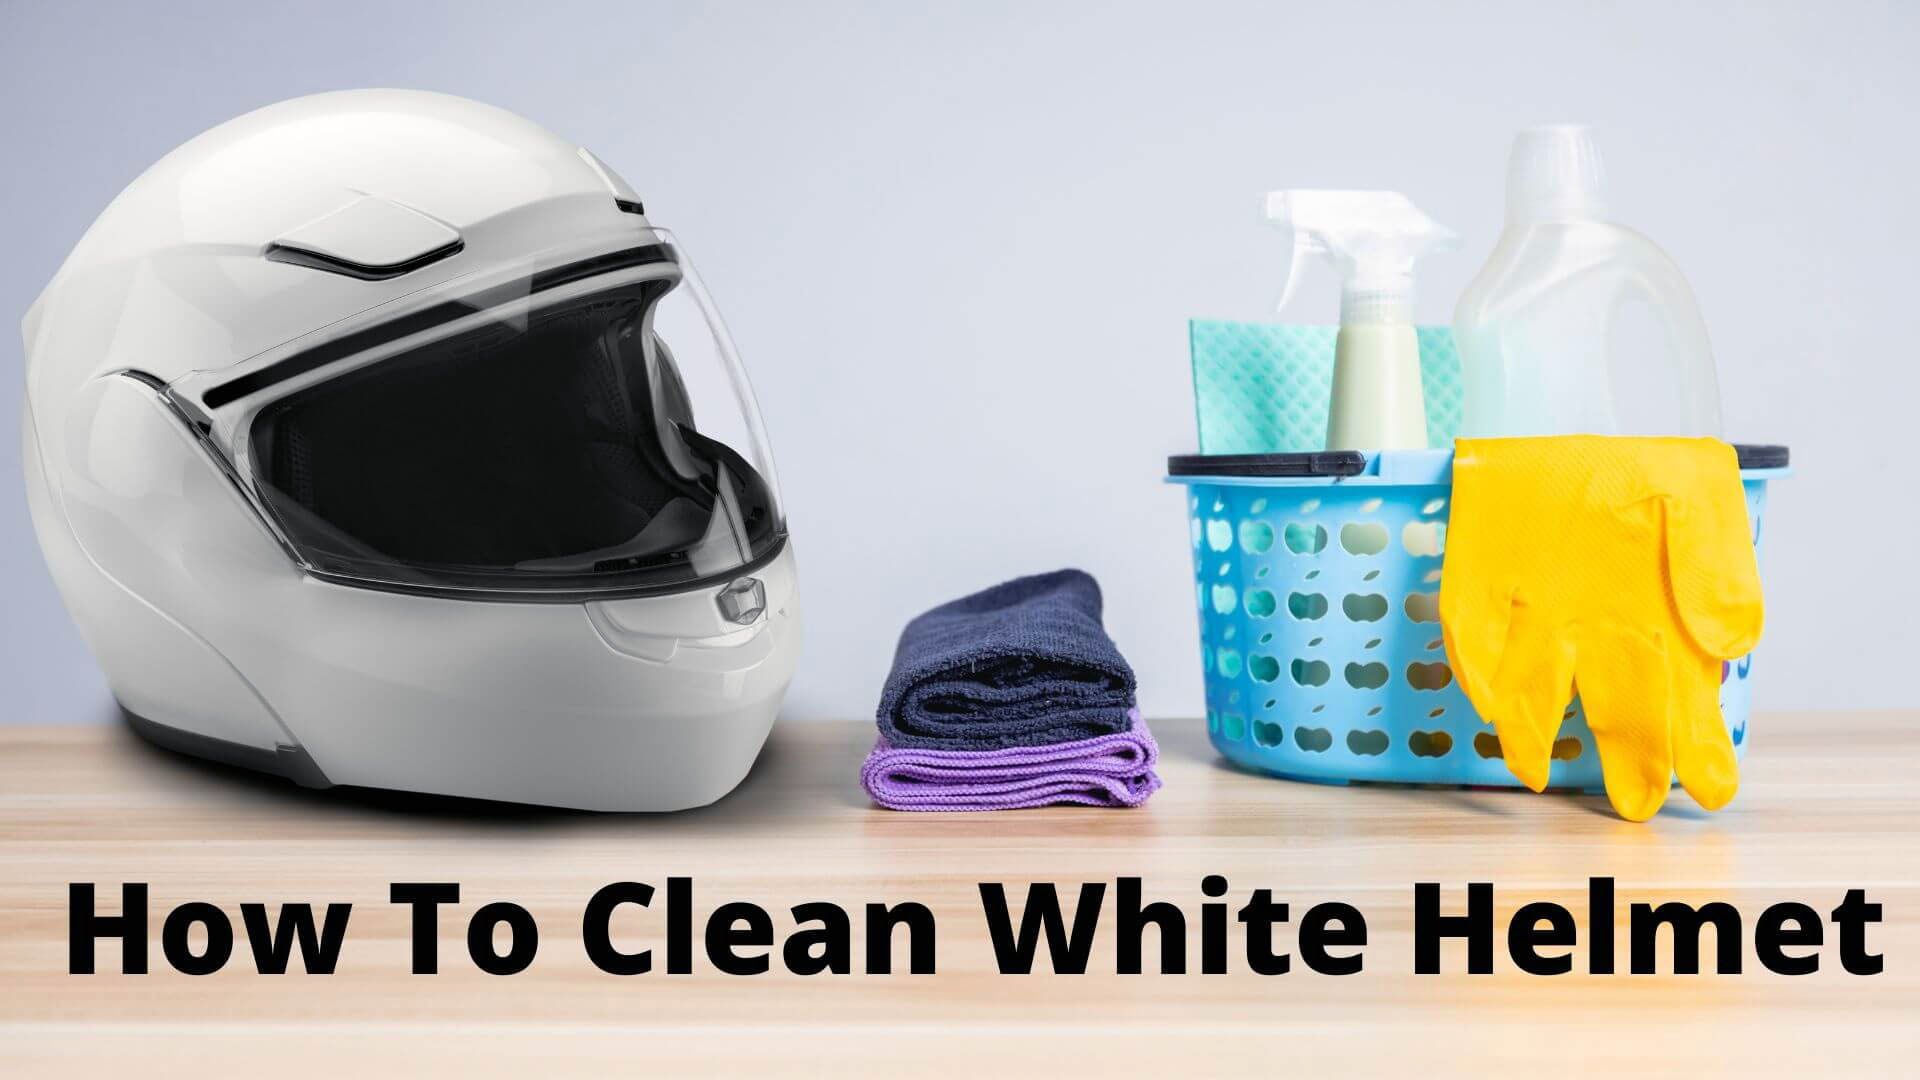 How To Clean White Helmet For Ride Safety